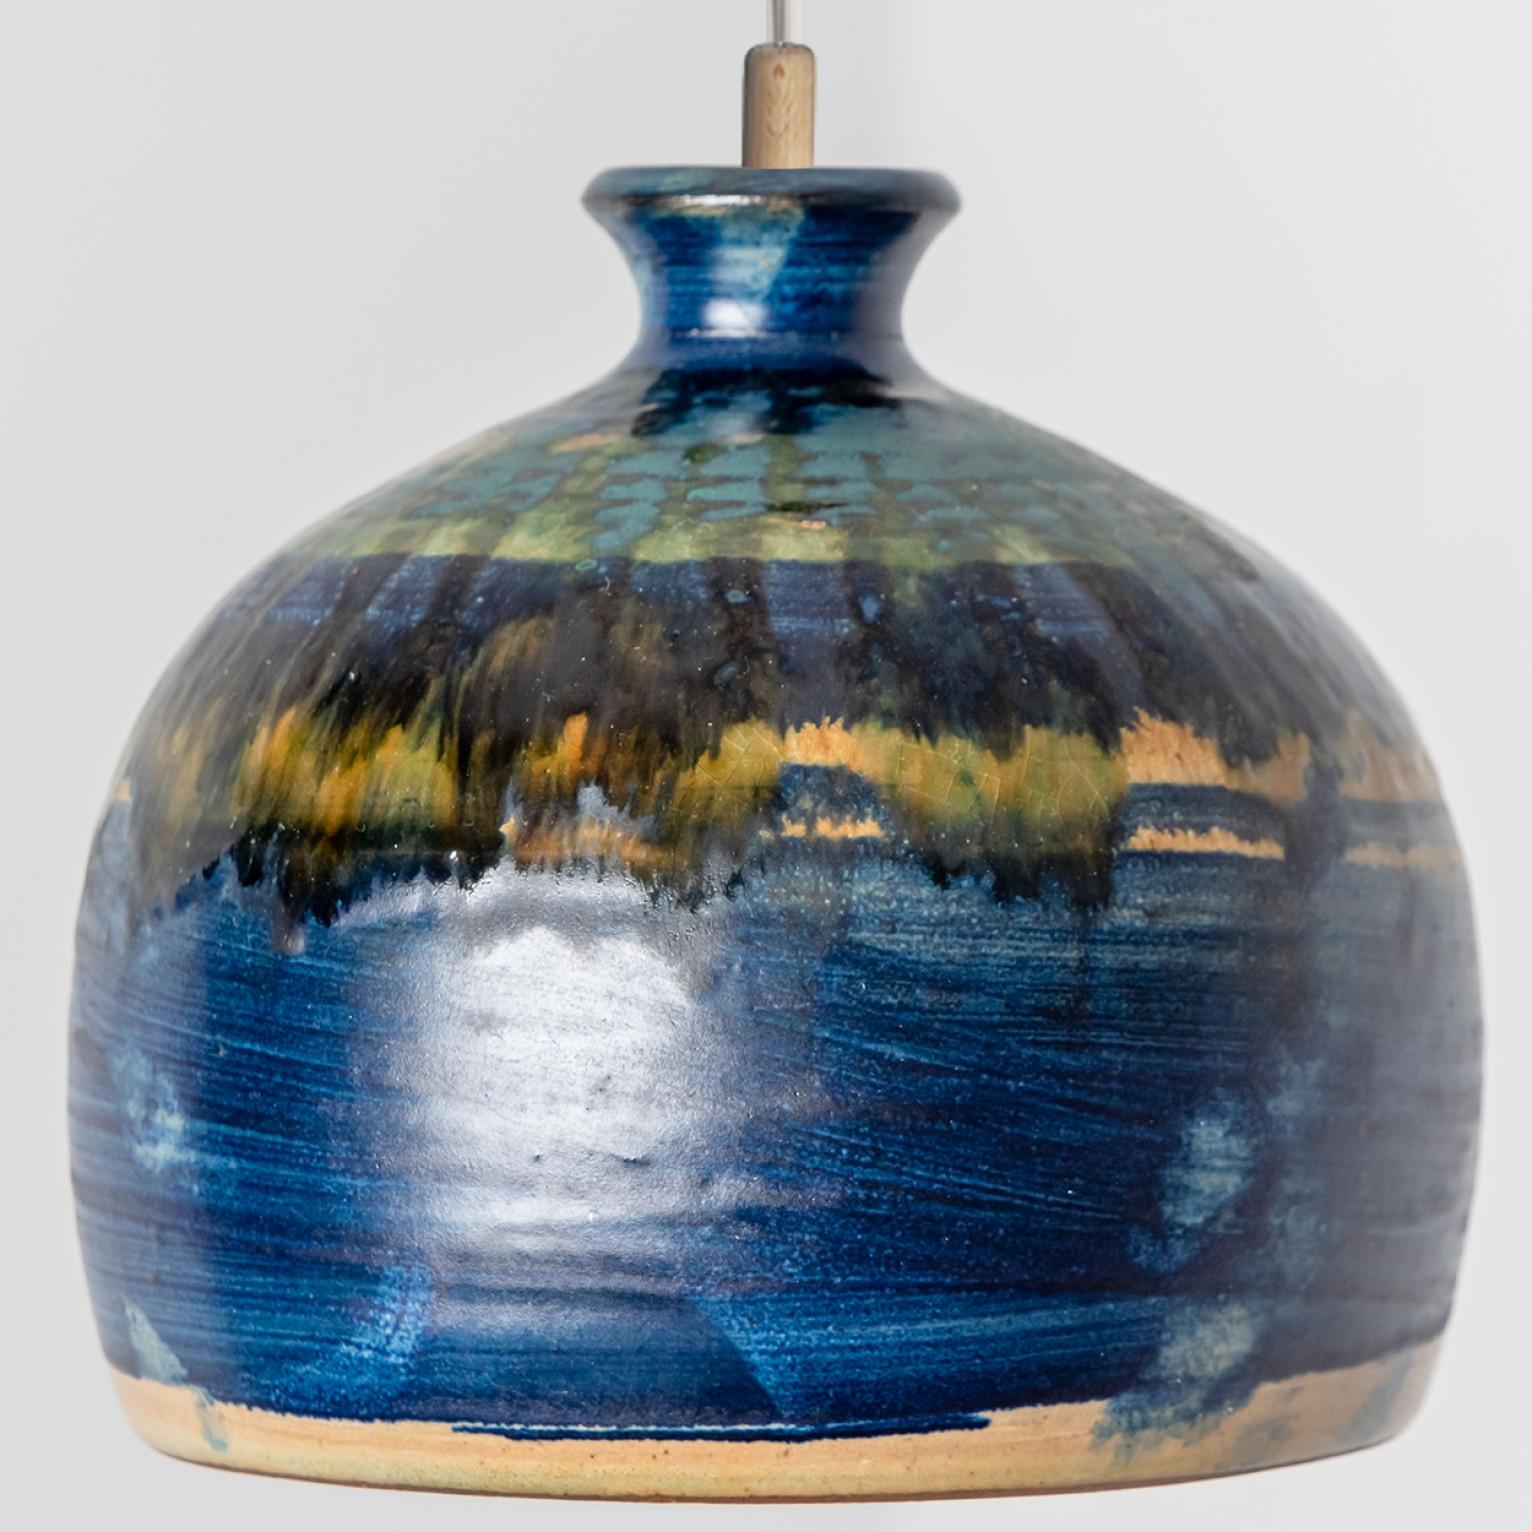 Stunning small round hanging lamp with a bowl-like shape, made with rich aqua-colored cobalt and yellow ceramics, manufactured in the 1970s in Denmark. We also have a multitude of unique colored ceramic light sets and arrangements, all available in